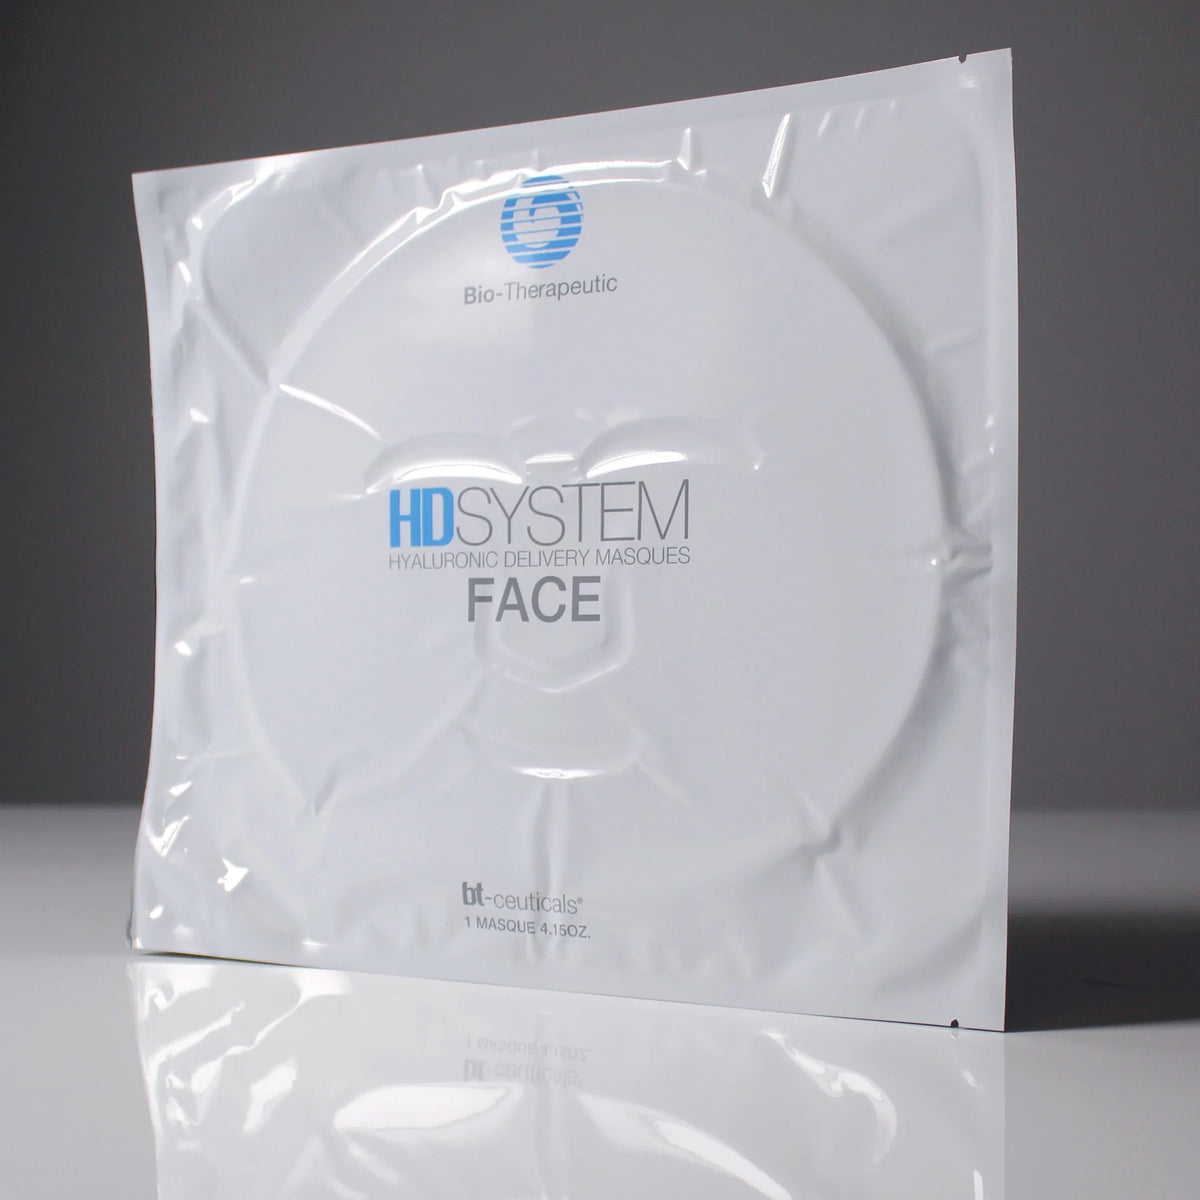 Bio-Therapeutic Hyaluronic Delivery System Face Mask 10pk